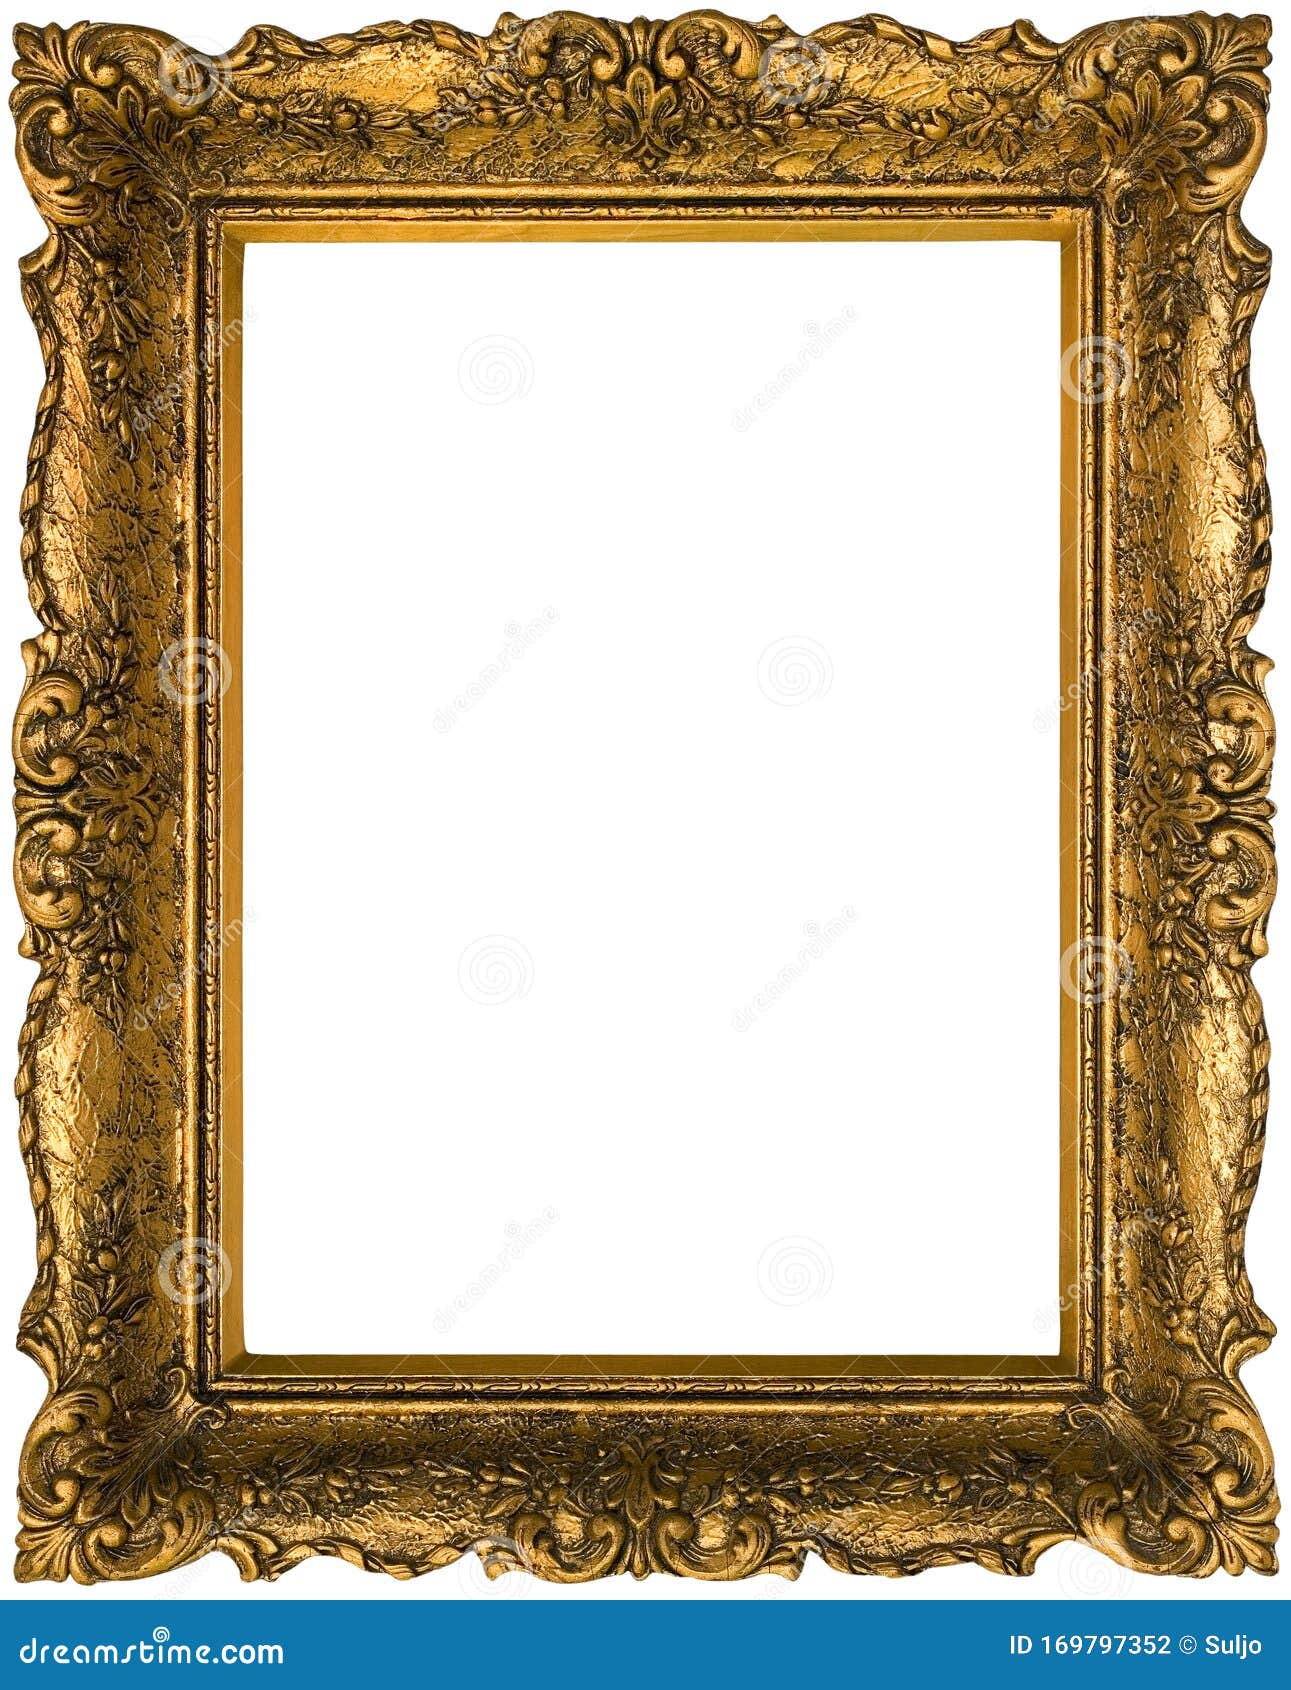 46 671 Transparent Frame Photos Free Royalty Free Stock Photos From Dreamstime